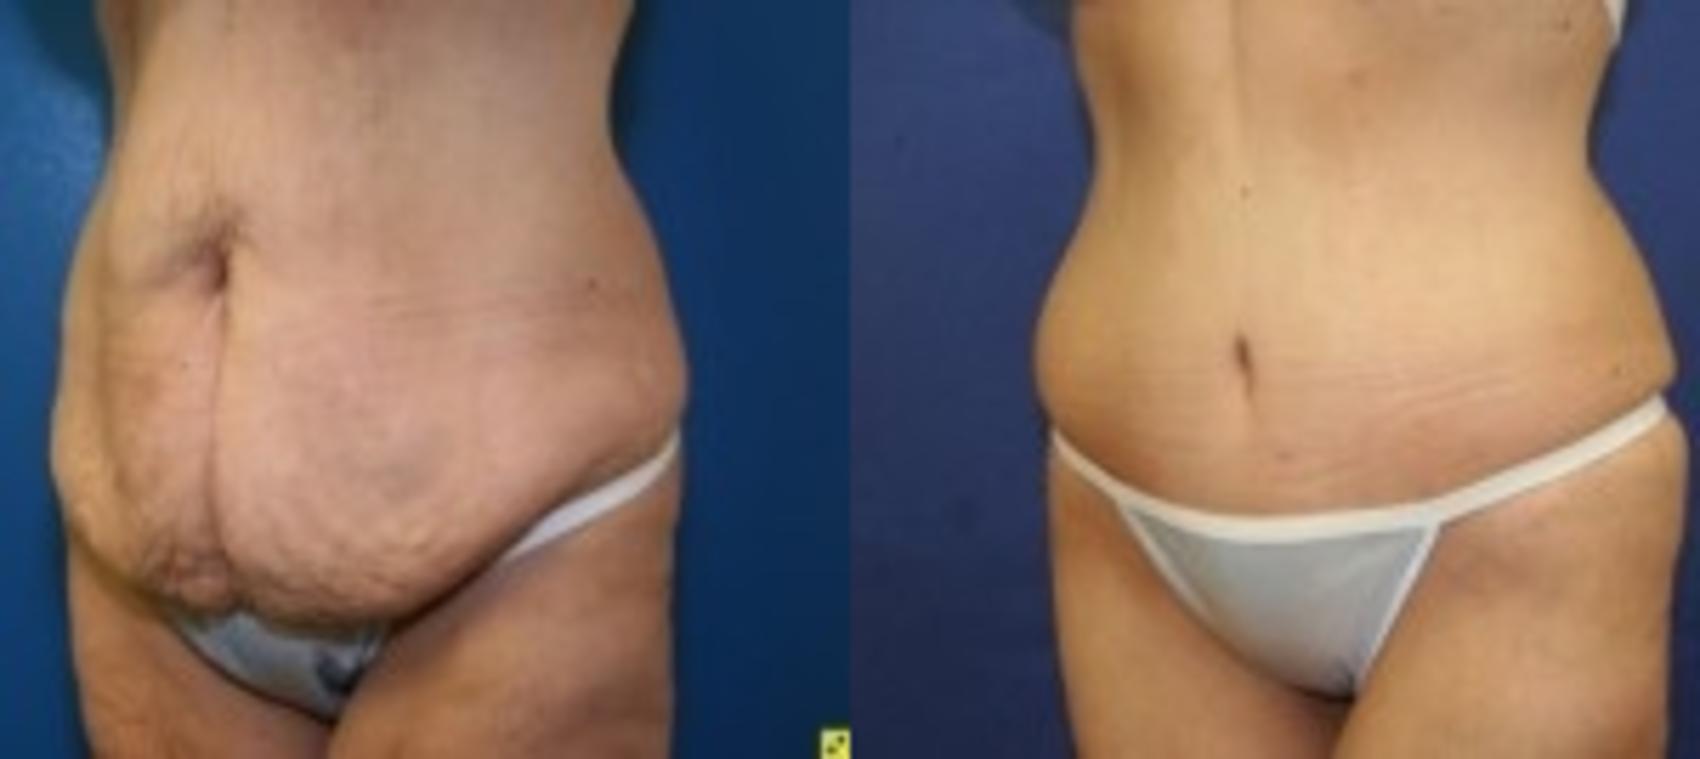 Before & After Body Contouring After Weight Loss Case 3 Front View in Ann Arbor, MI